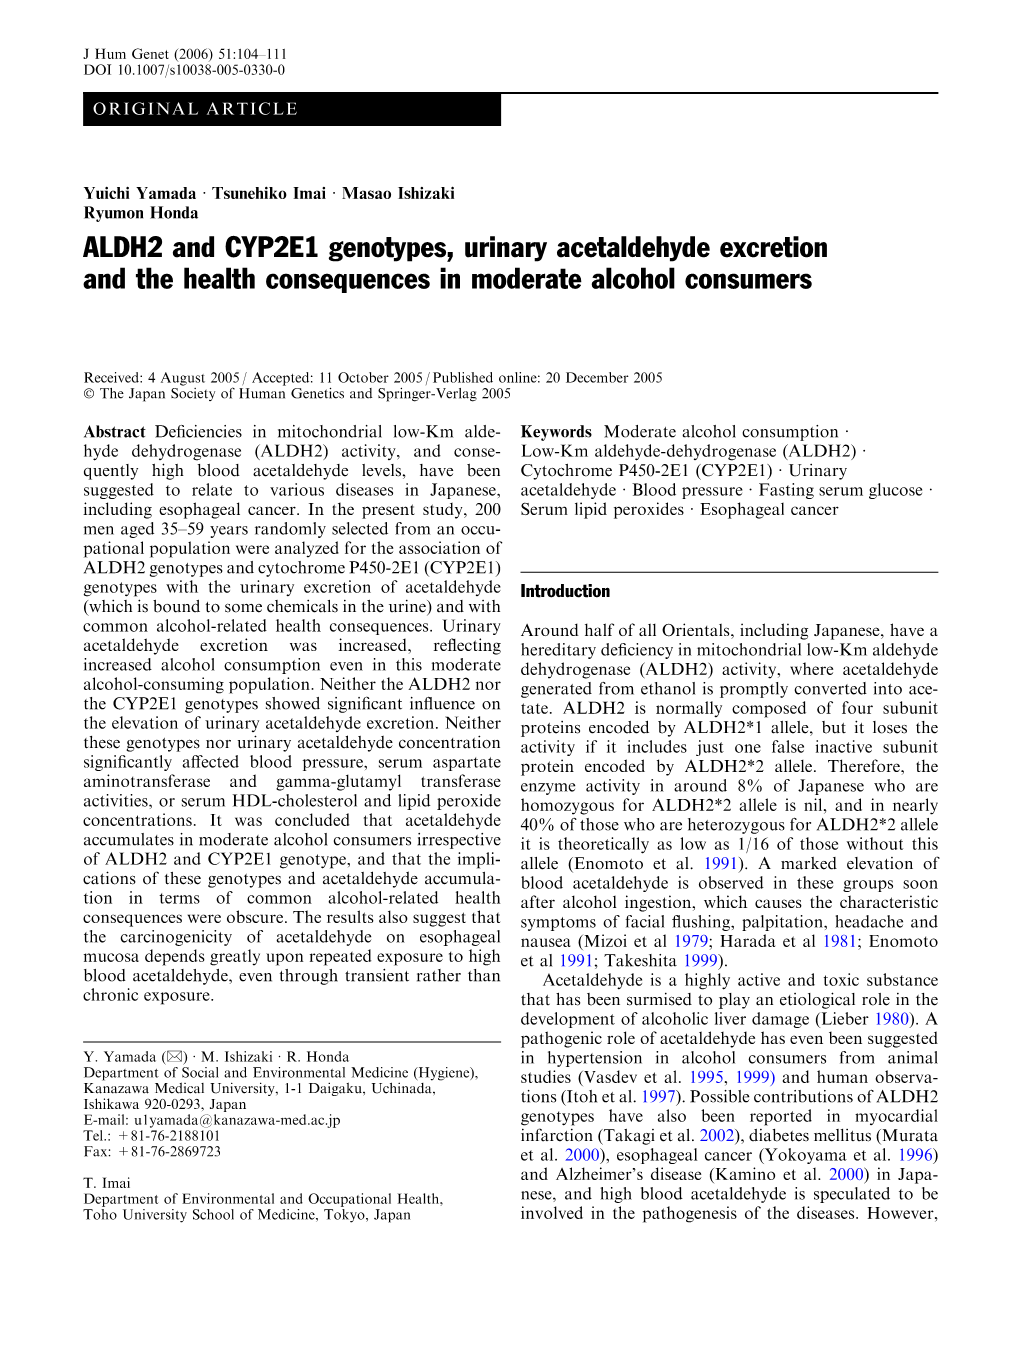 ALDH2 and CYP2E1 Genotypes, Urinary Acetaldehyde Excretion and the Health Consequences in Moderate Alcohol Consumers